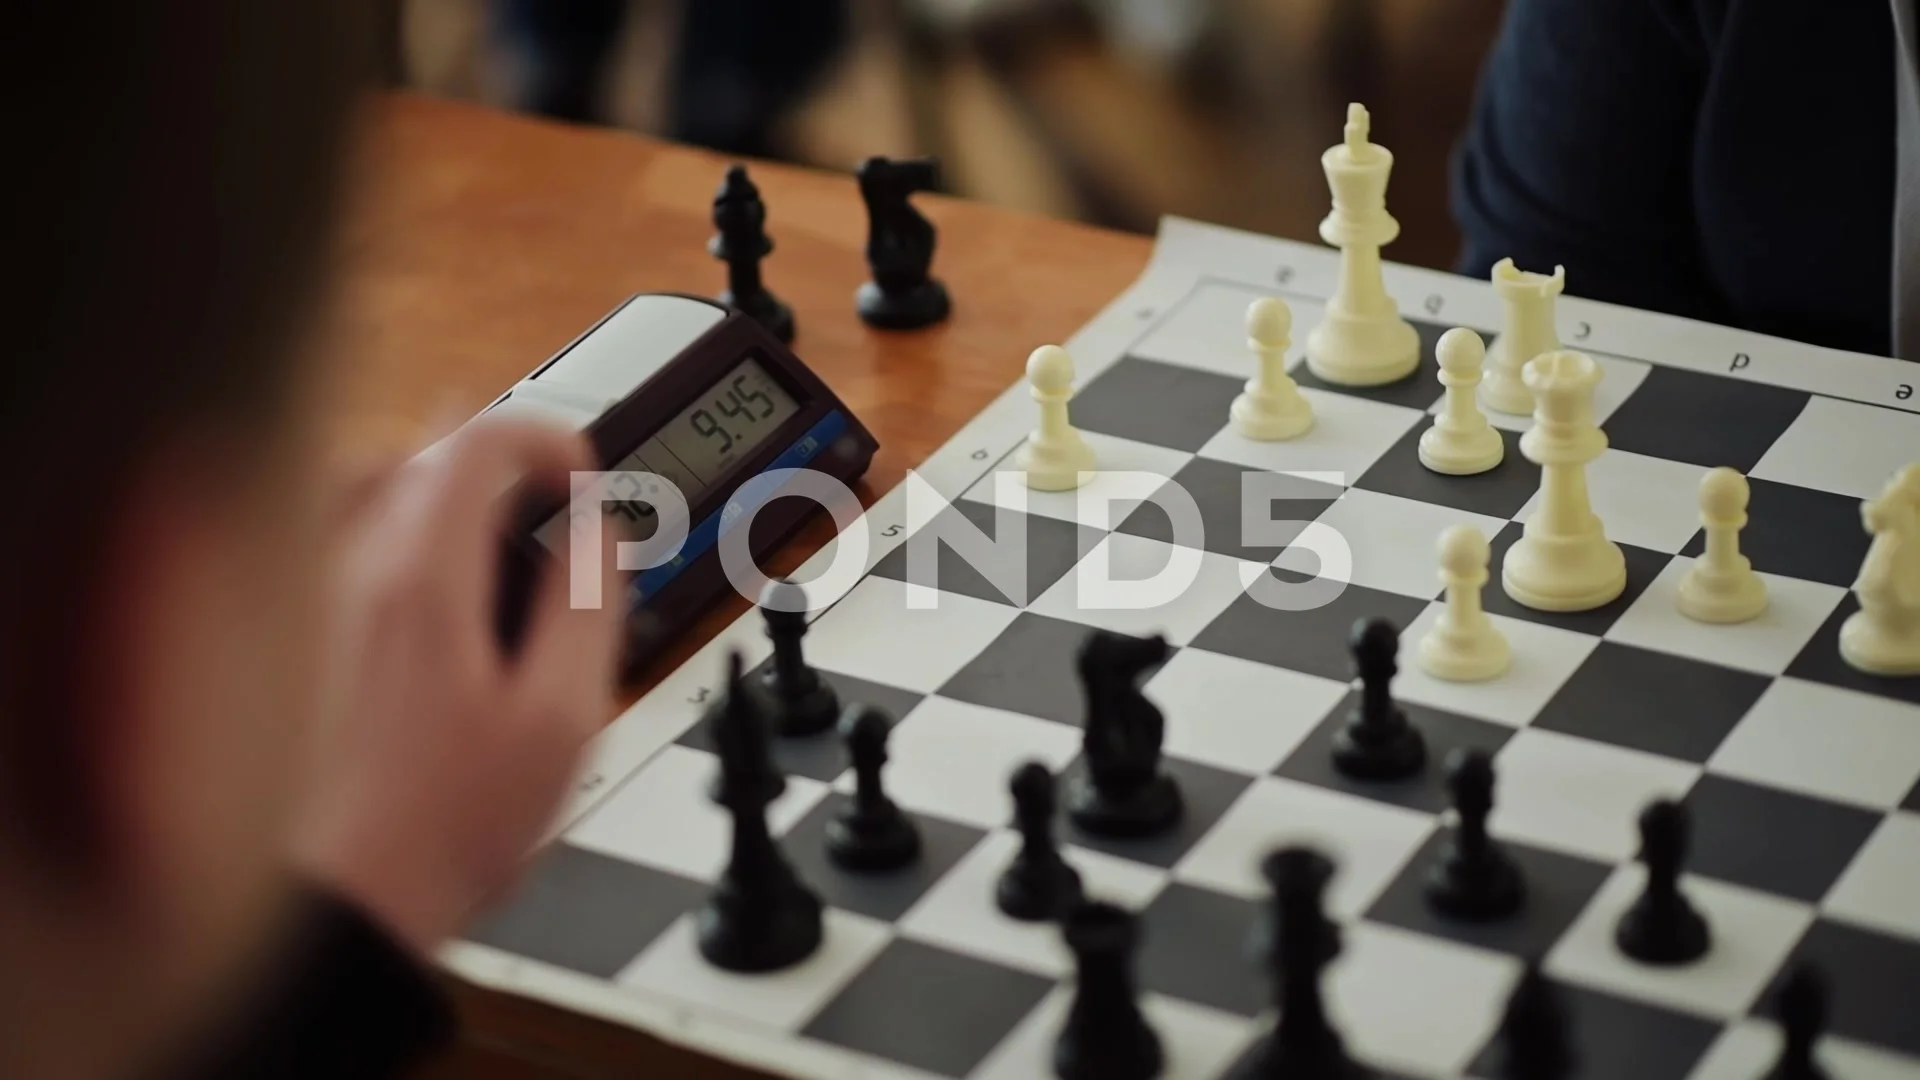  Play Chess With Speed